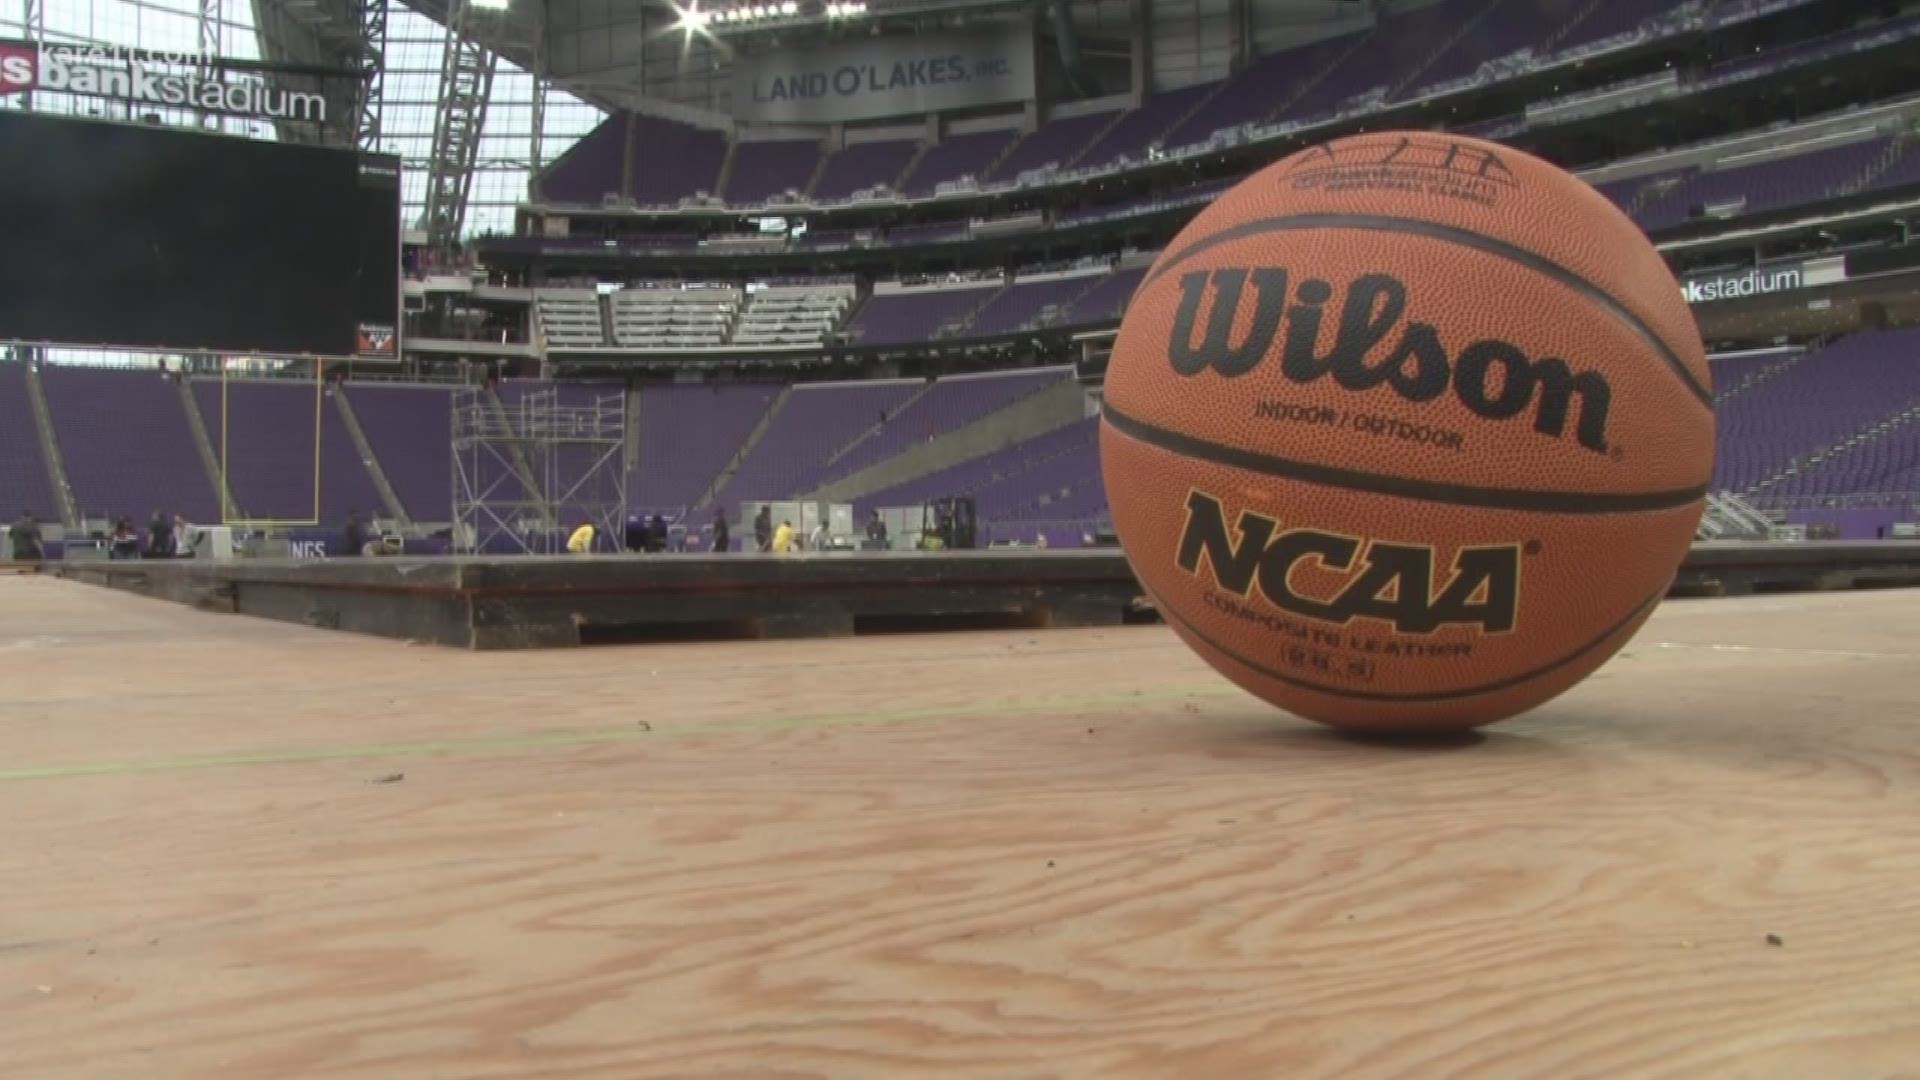 City leaders say it's going to take a village to host the men's 2019 NCAA Final Four tournament. https://kare11.tv/2zPHEKP